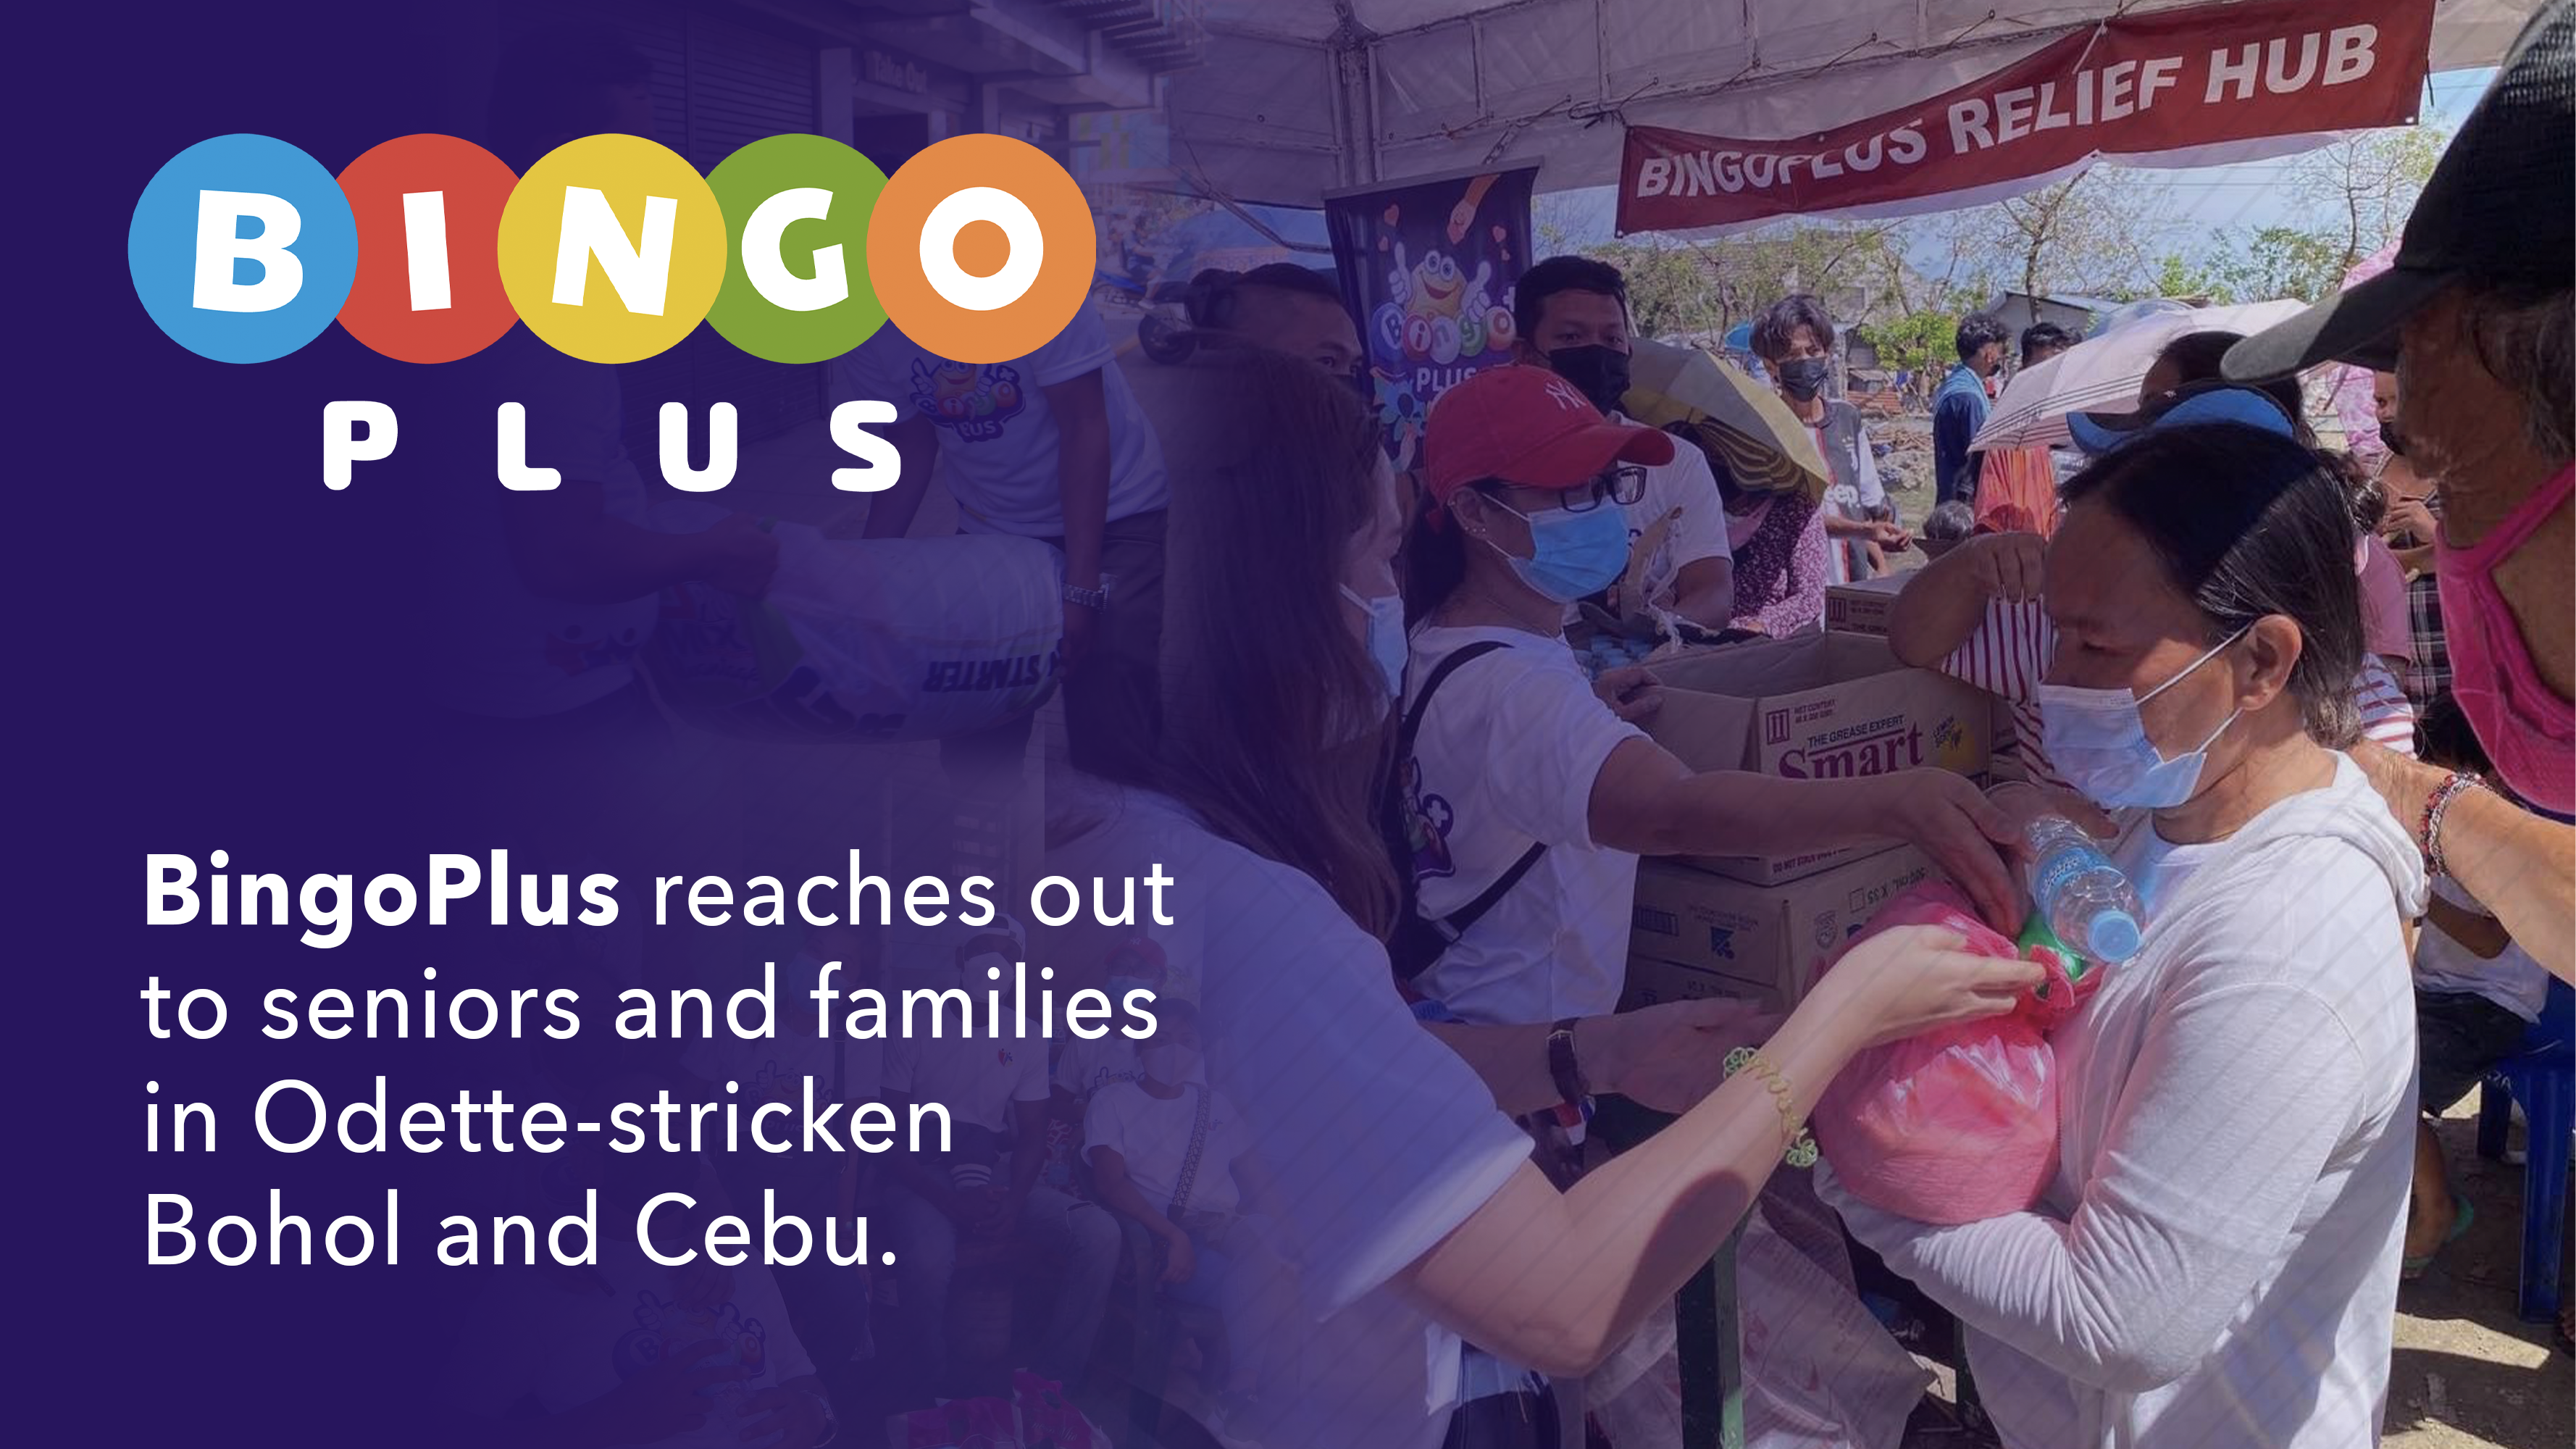 BingoPlus Reaches out to seniors and families in Odette-stricken Bohol and Cebu.